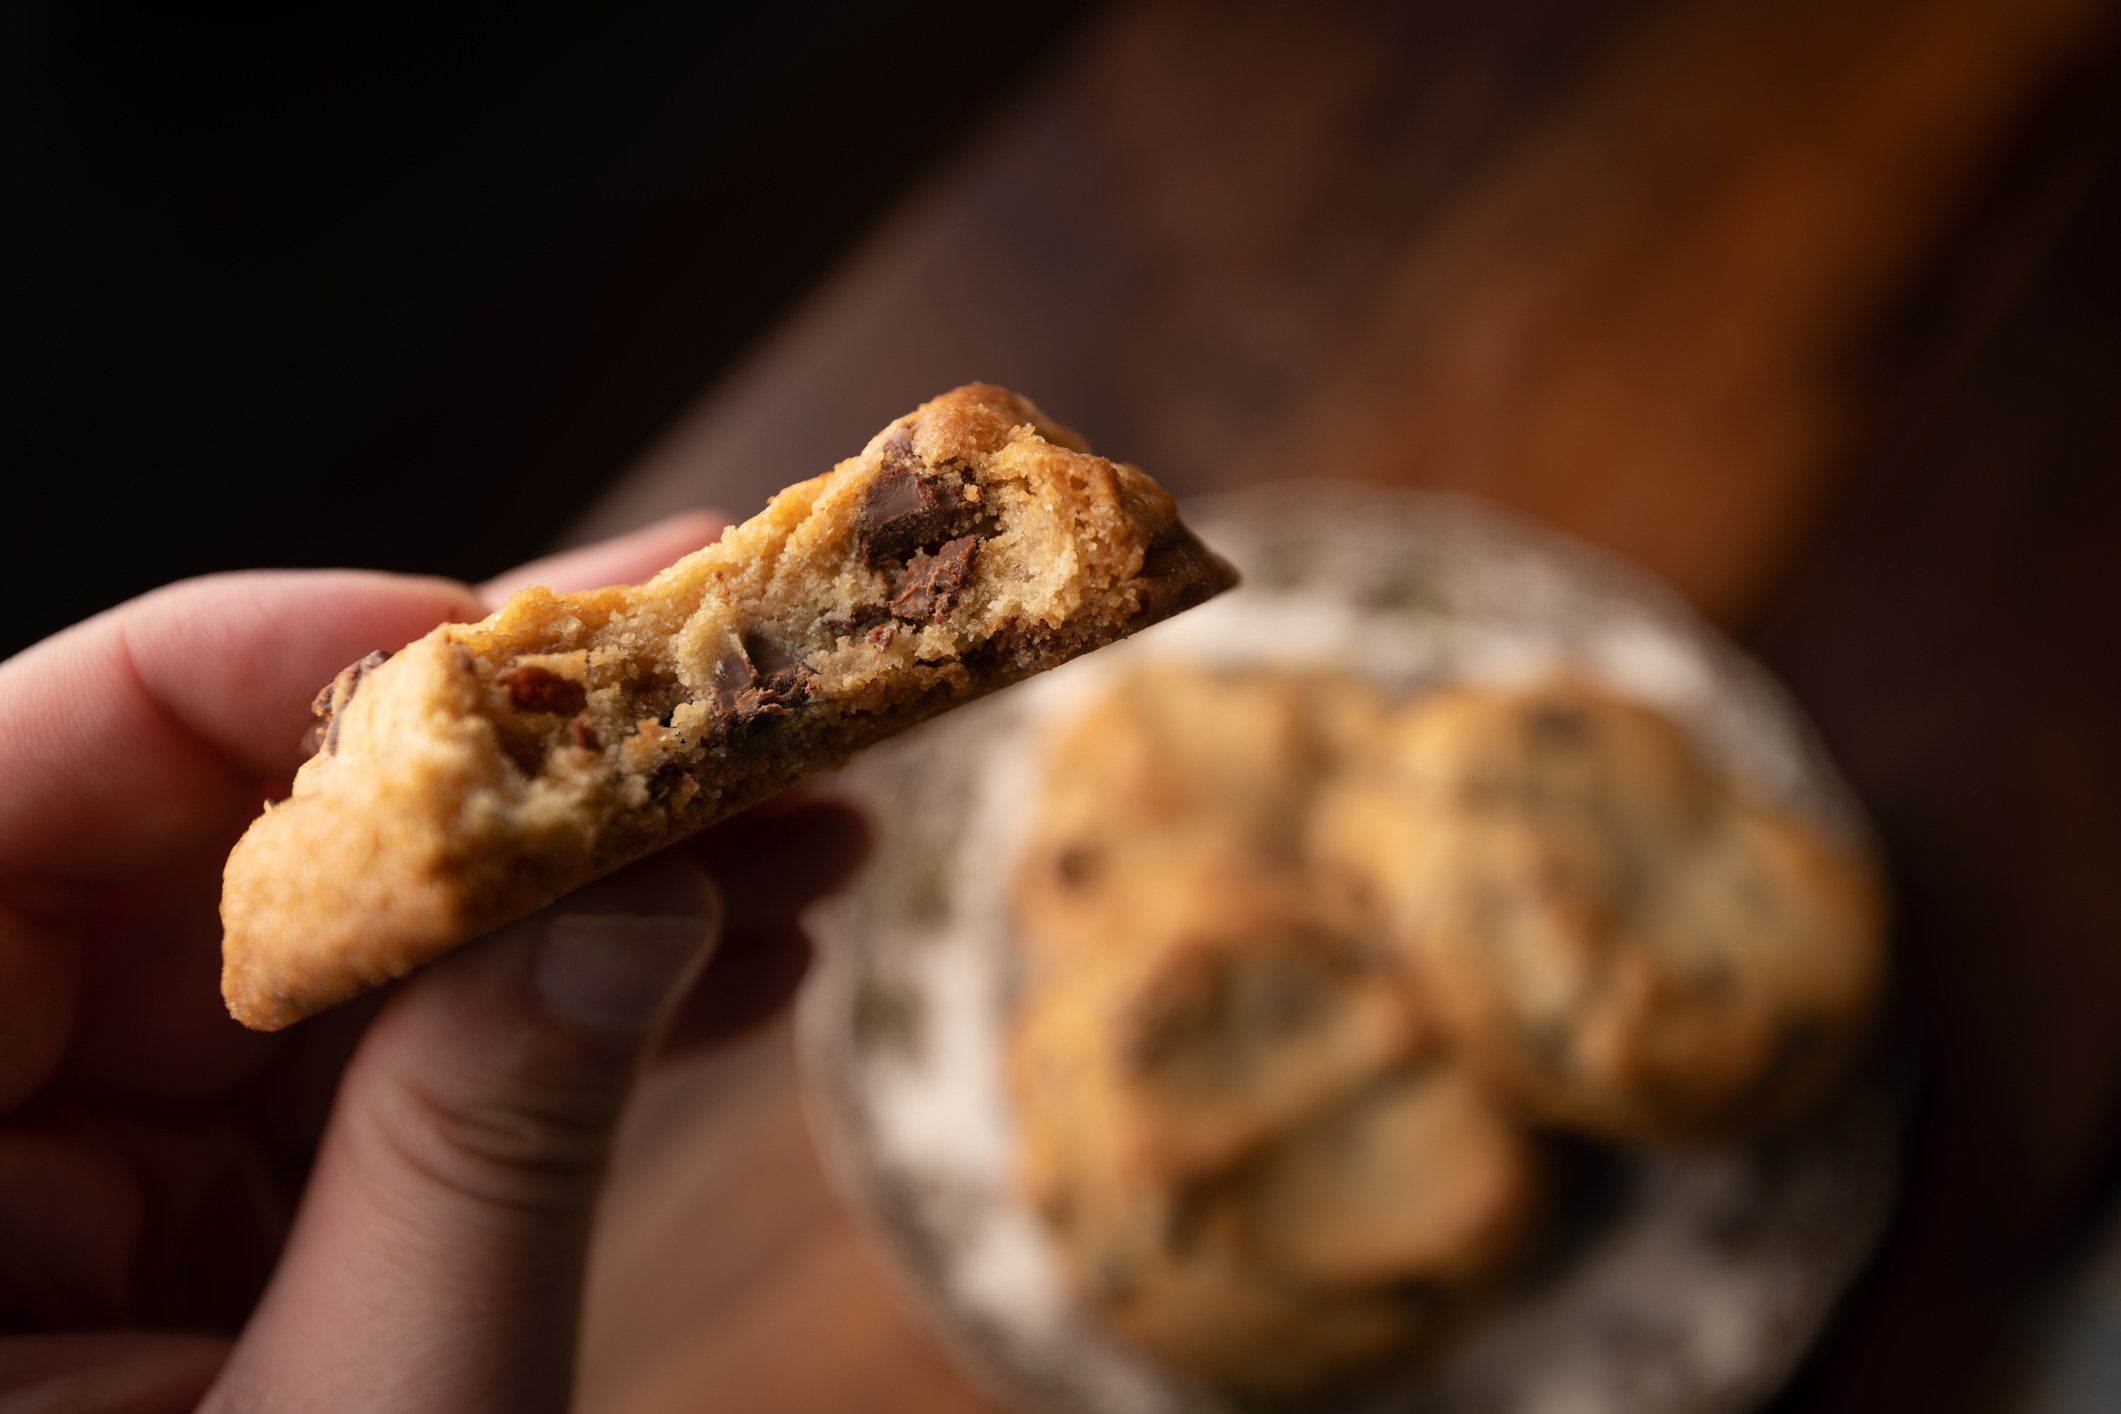 A chocolate chip cookie with a bite taken out of it.